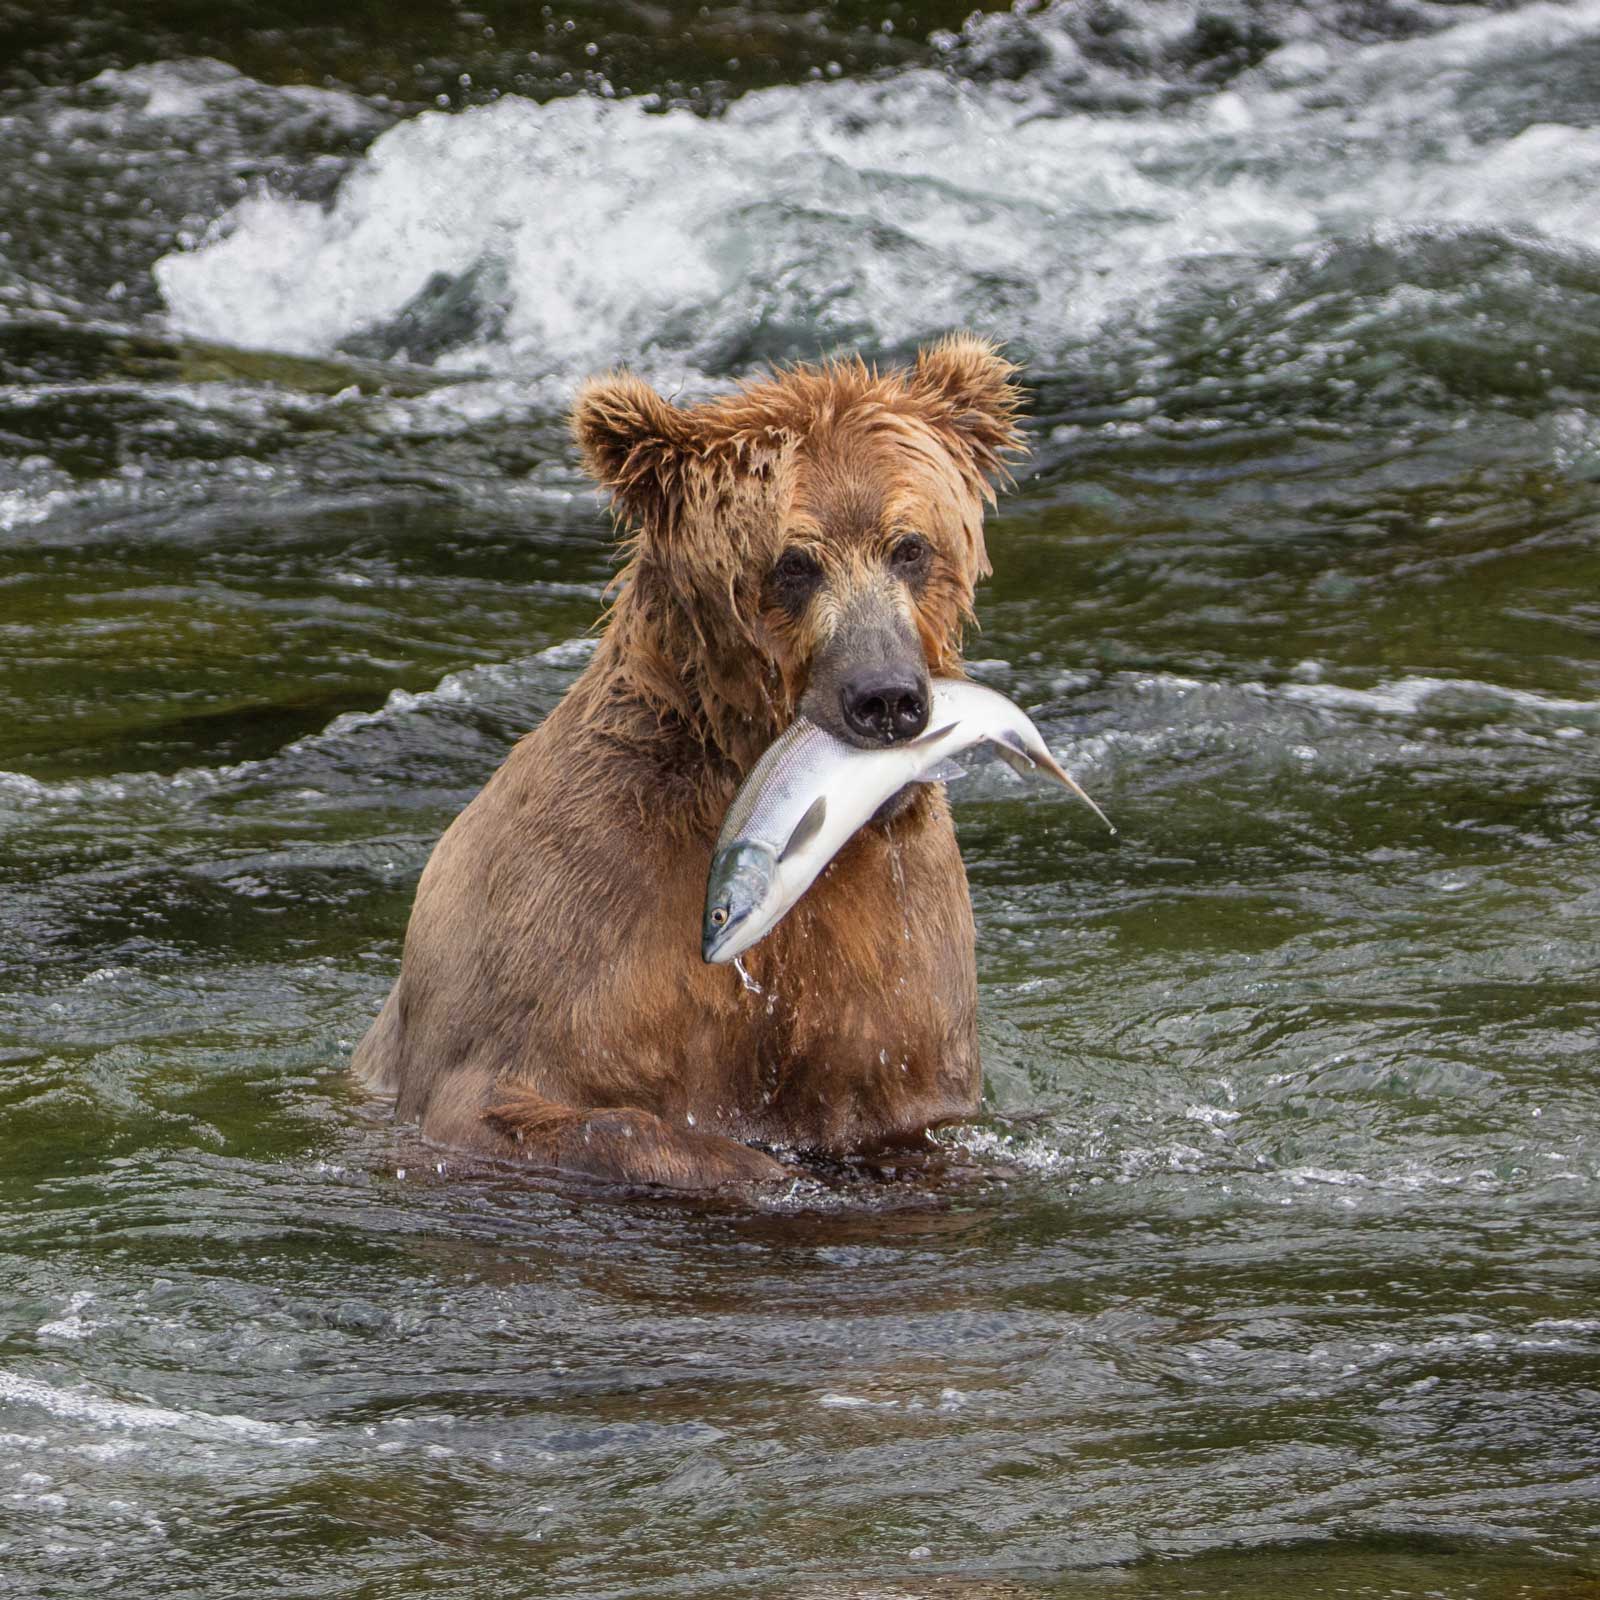 A bear with fish in mouth